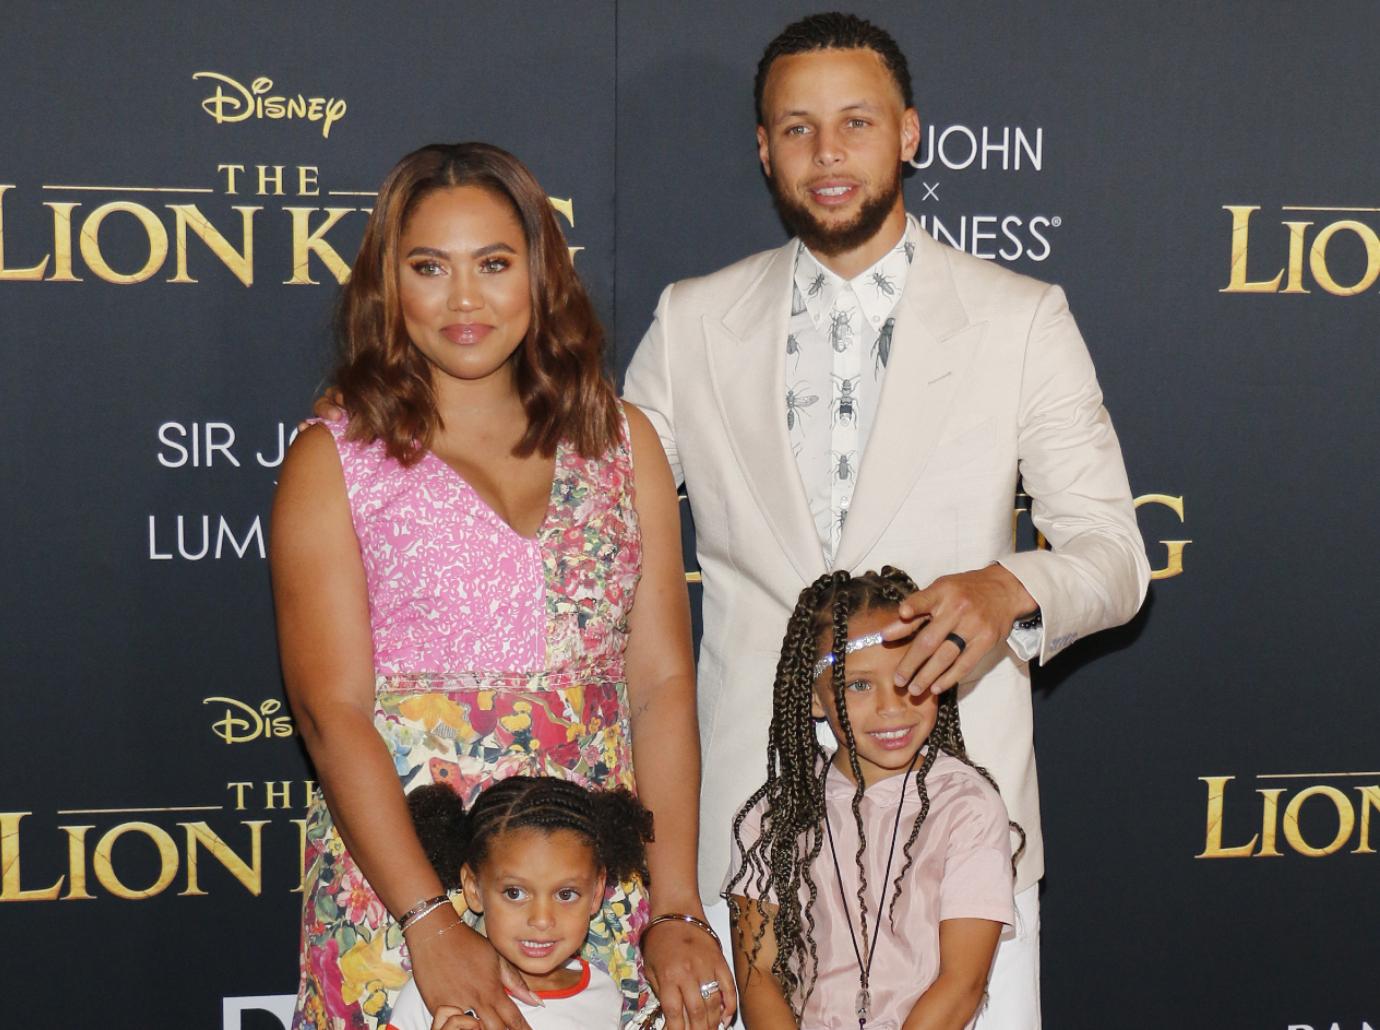 Steph Curry's Parents, Sonya and Dell, Accuse Each Other of Cheating in  Divorce Docs